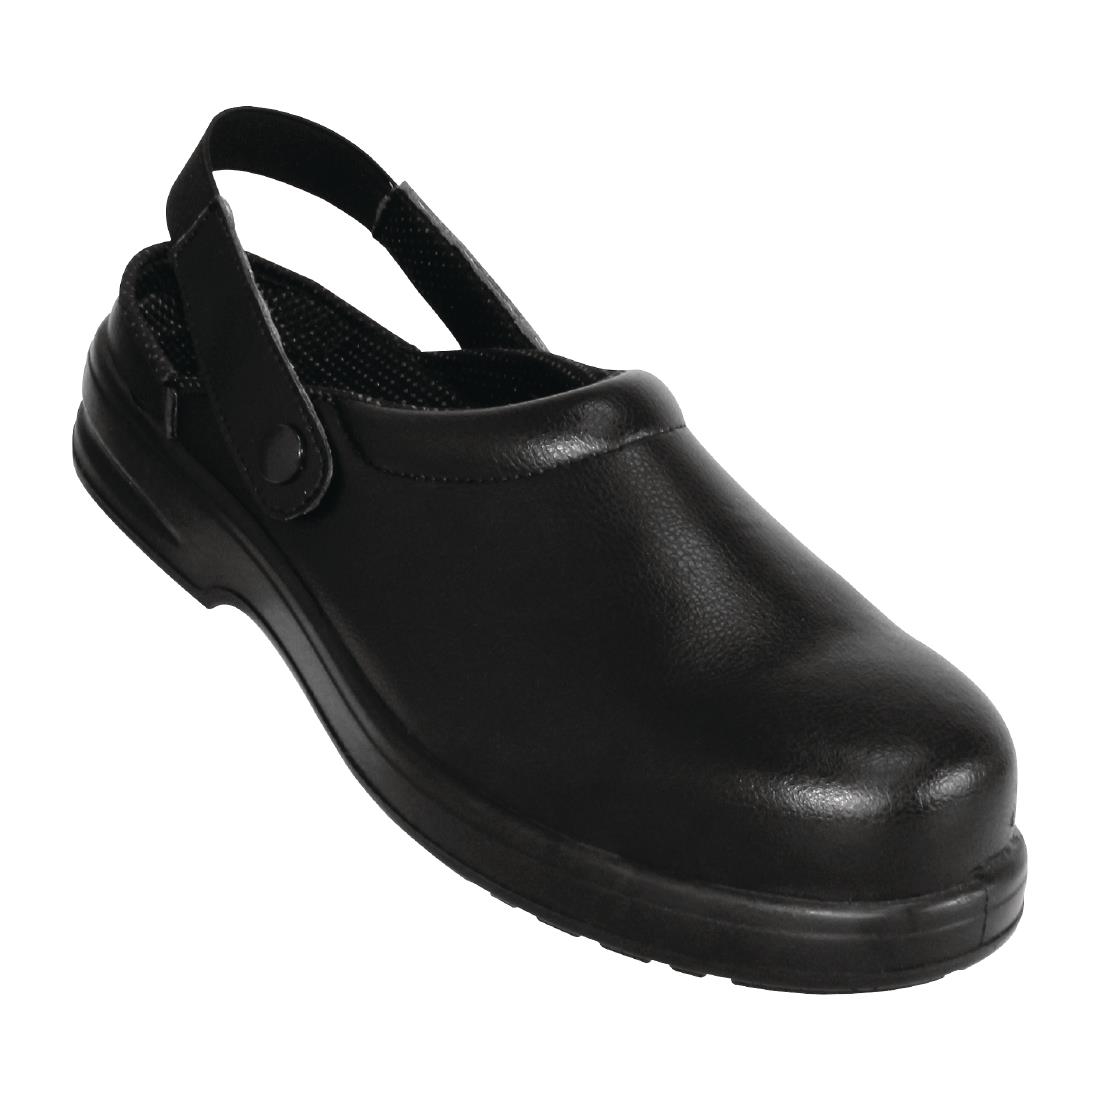 Slipbuster Lite Safety Clogs Black 40 - The Oxford Chef Shop